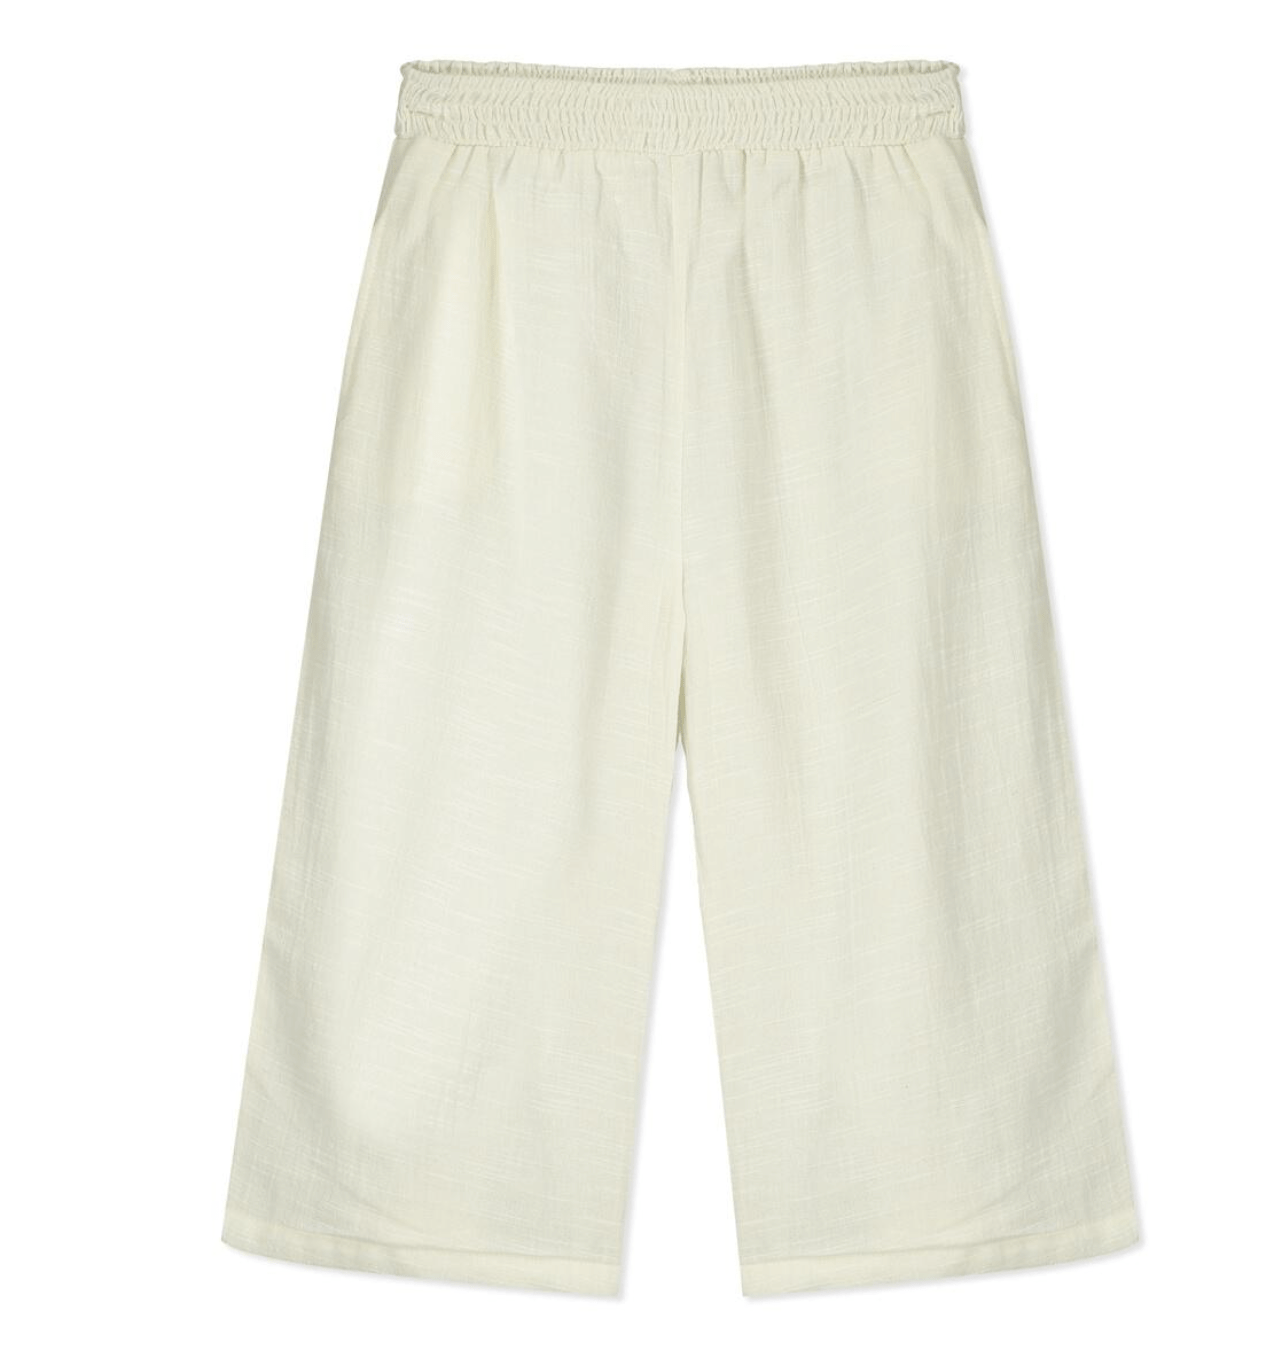 Poppet and Fox Cream Woven Pants